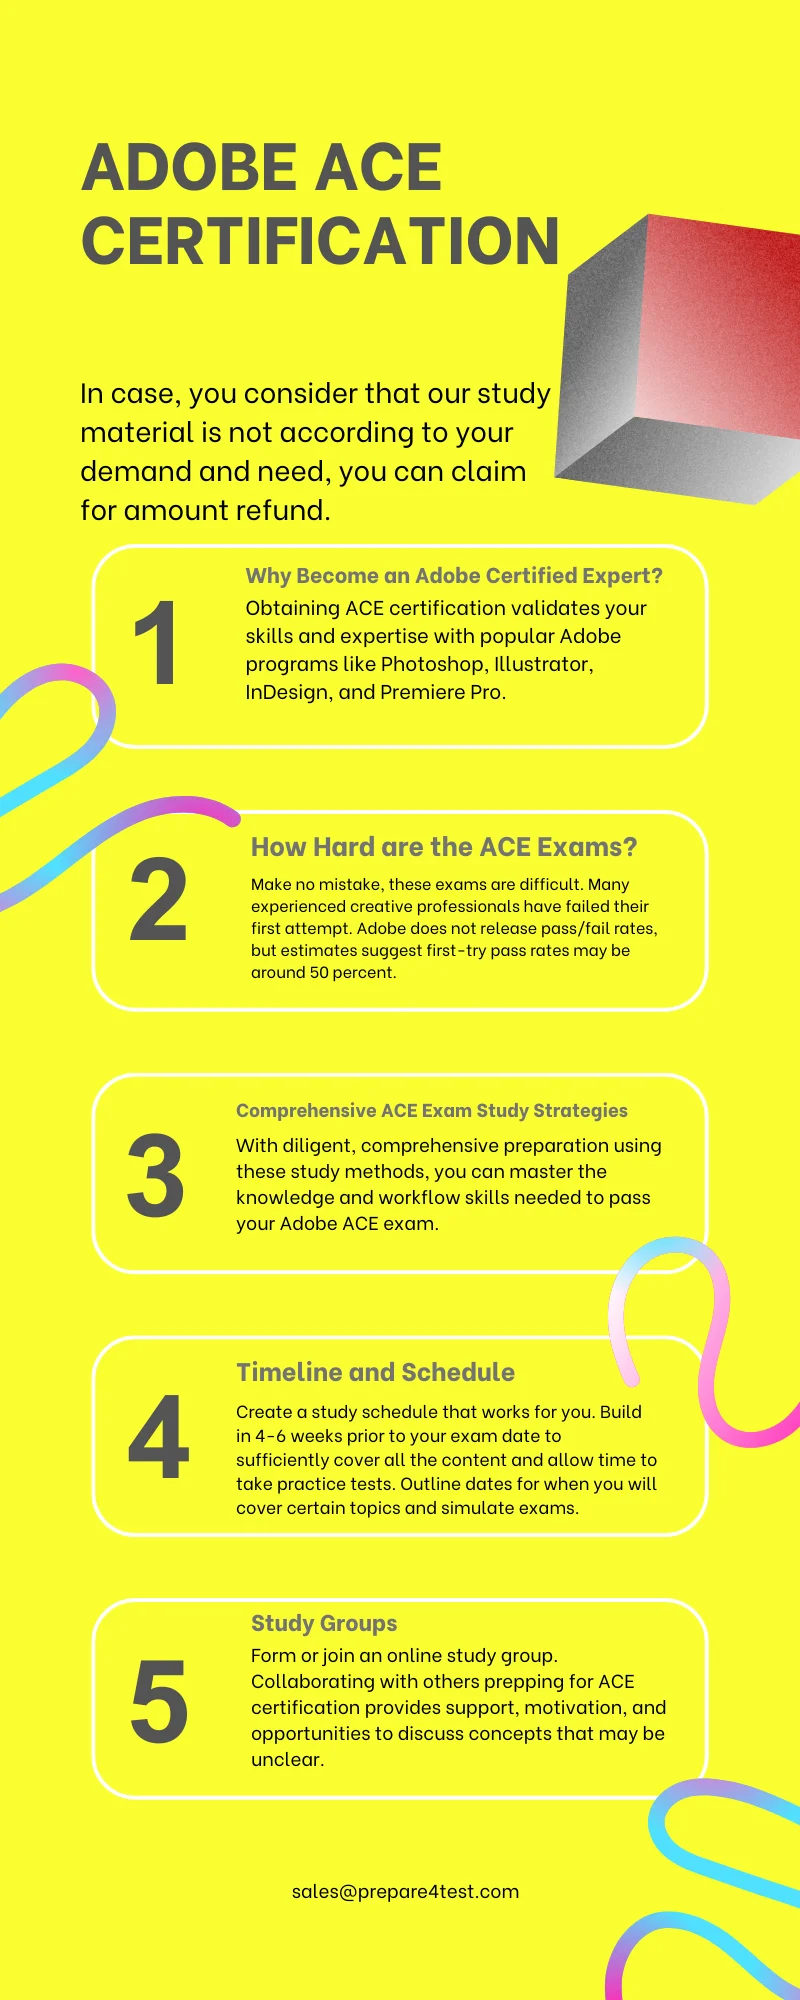 Adobe ACE Certification Infographic